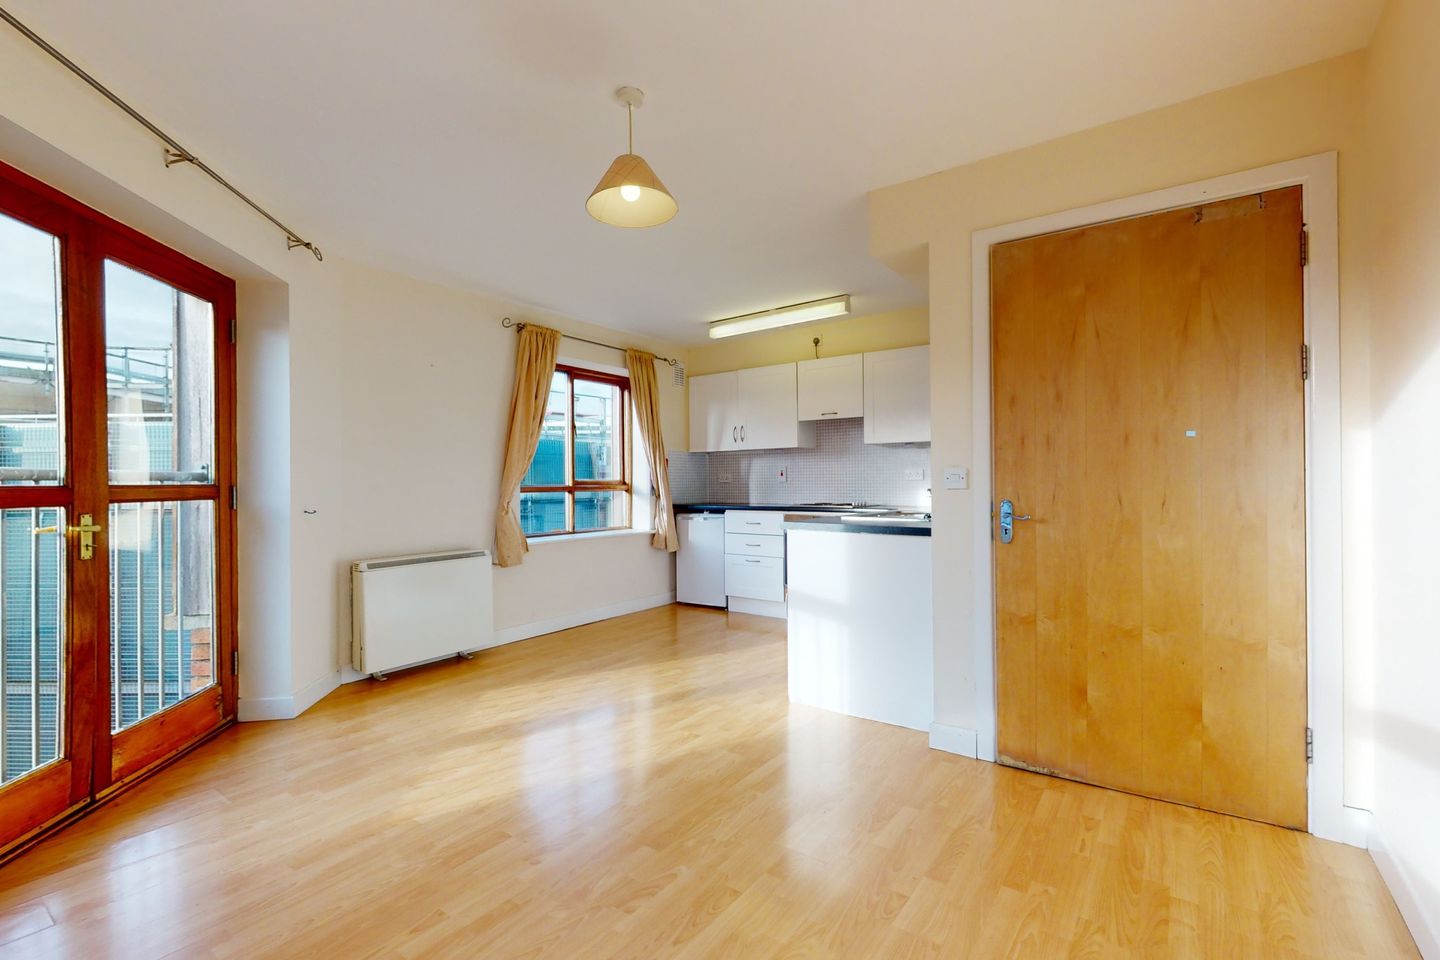 Apartment 60, Penrose Court, Waterford City, Co. Waterford